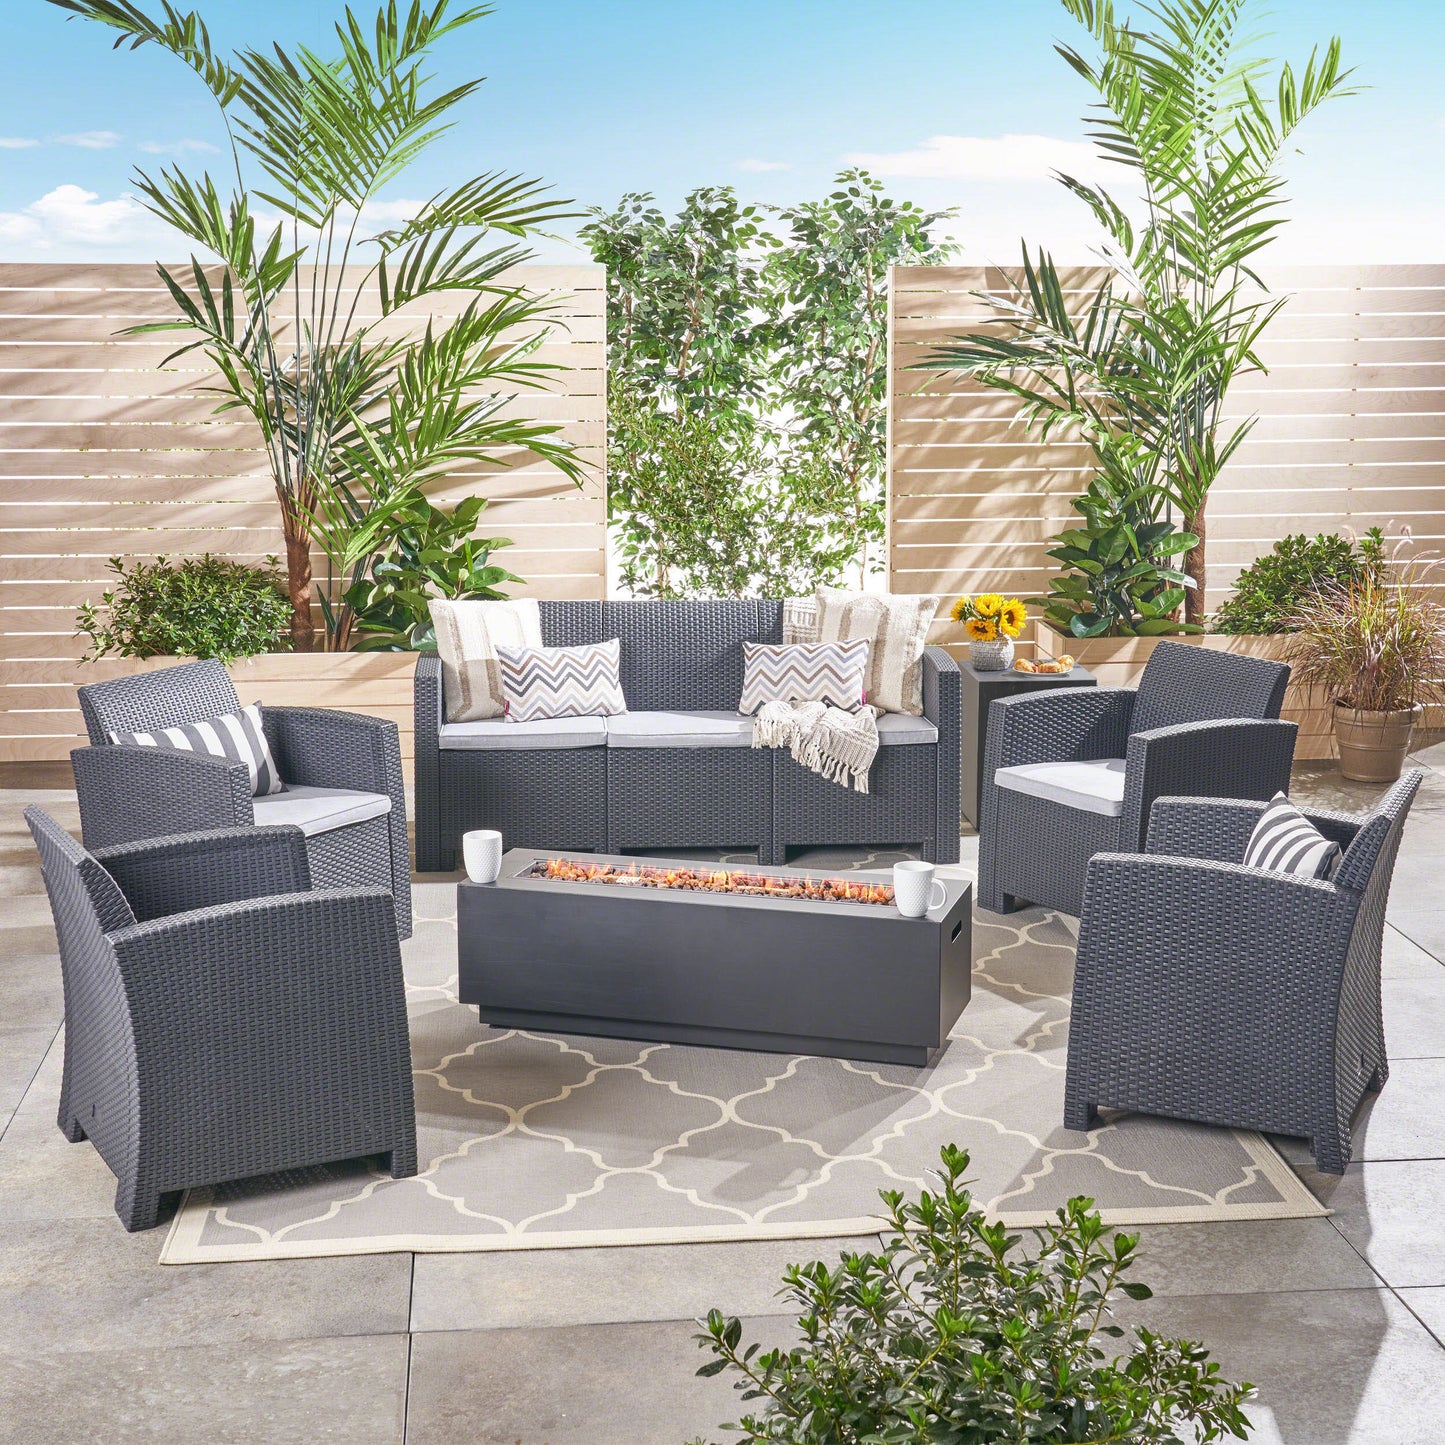 Dane Outdoor 7-Seater Wicker Print Chat Set with Fire Pit and Tank Holder, Charcoal with Light Gray and Dark Gray